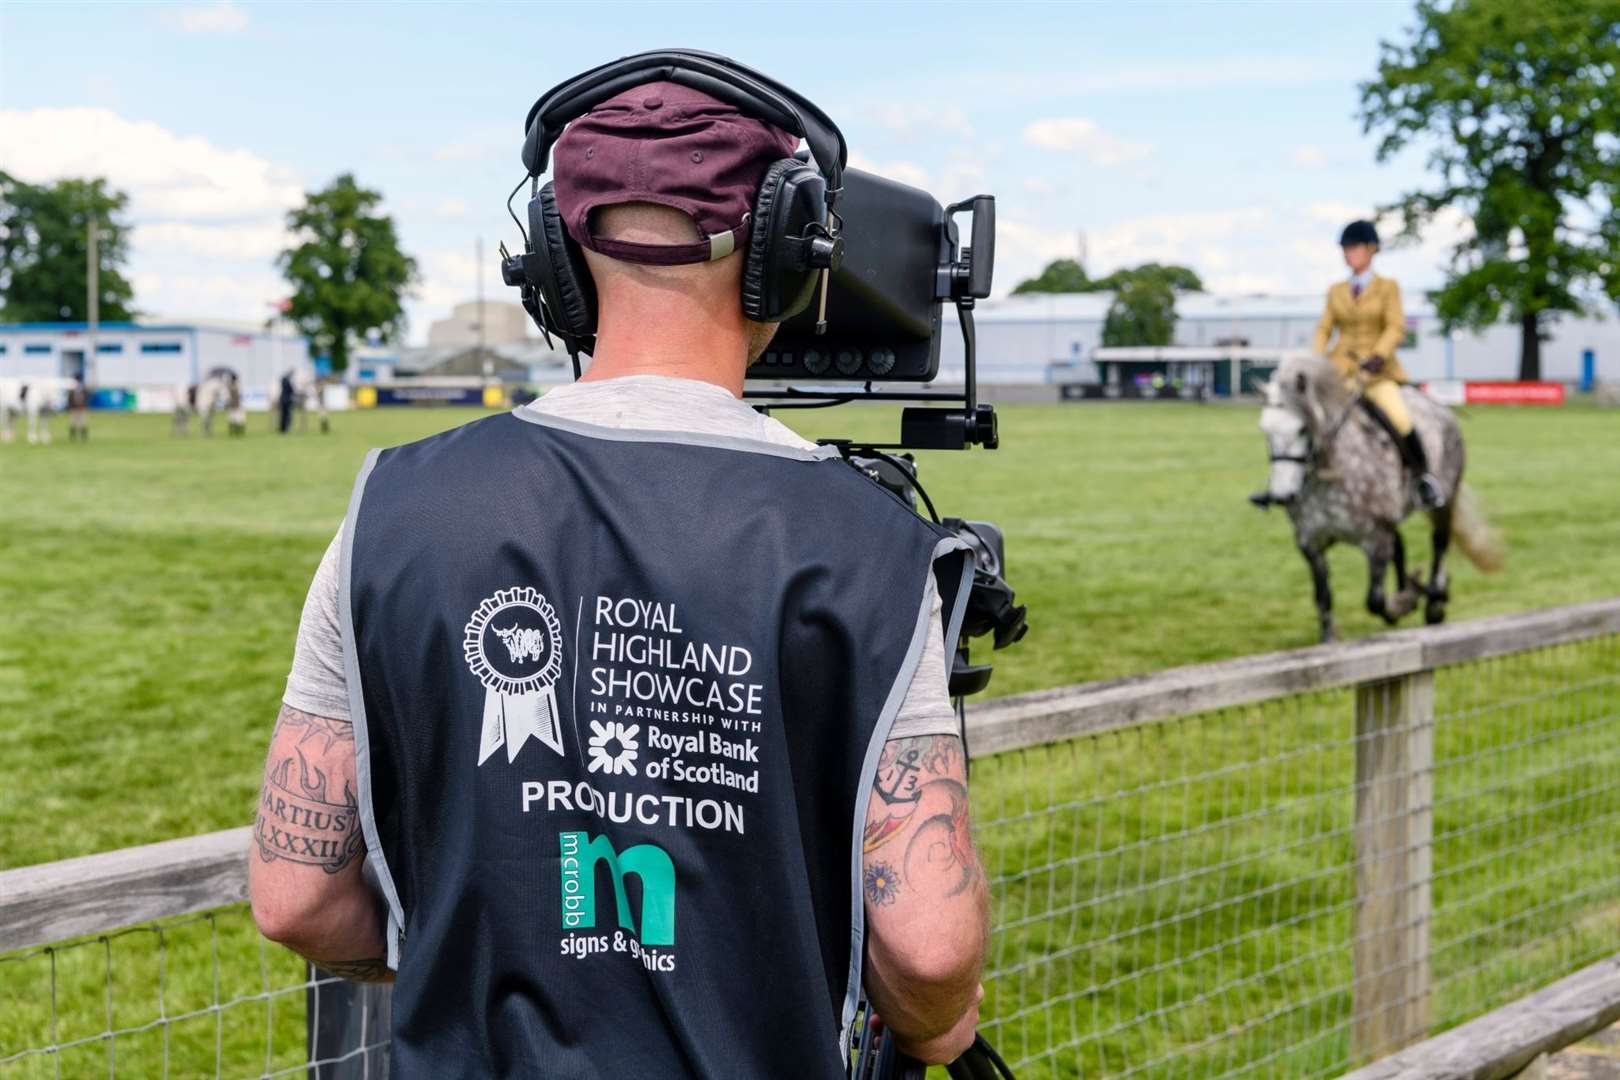 The Royal Highland Show will see four days of online broadcasting